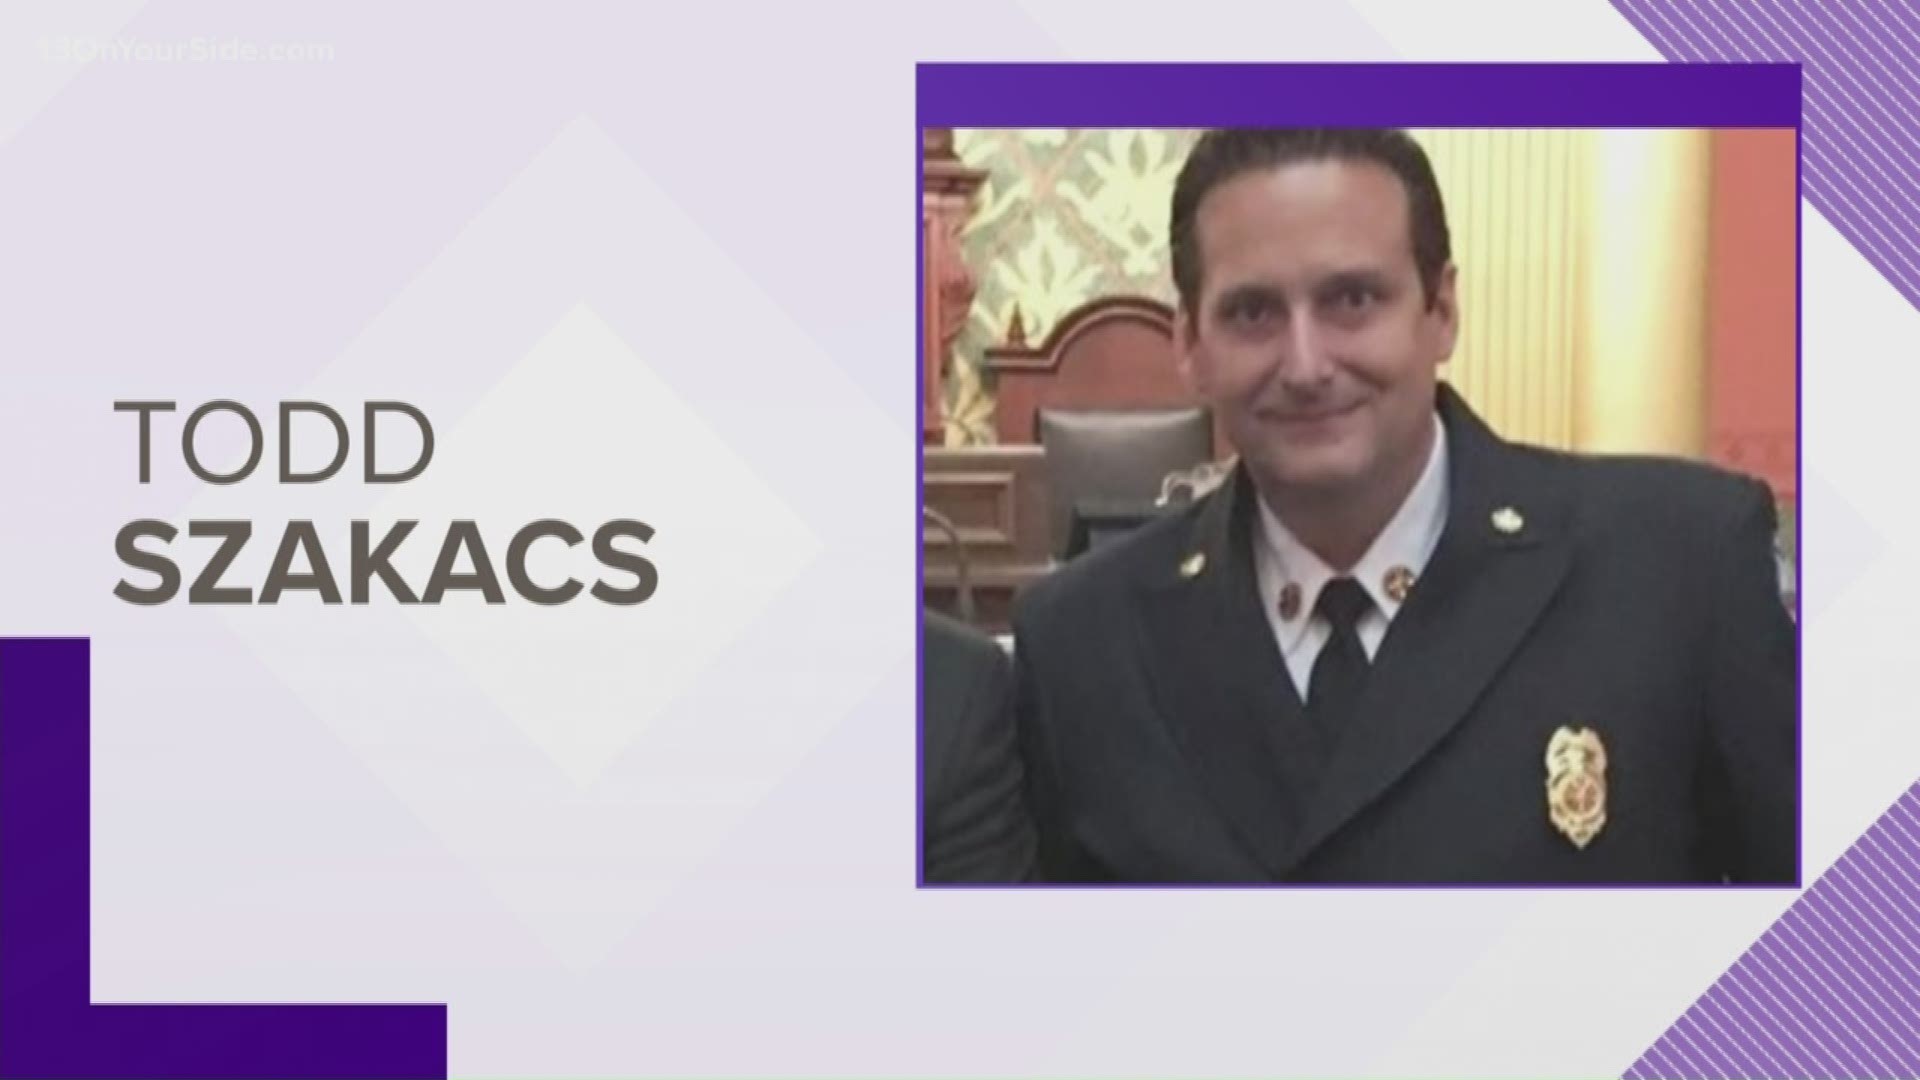 Former Fire Chief Todd Szakacs has been charged with embezzlement.